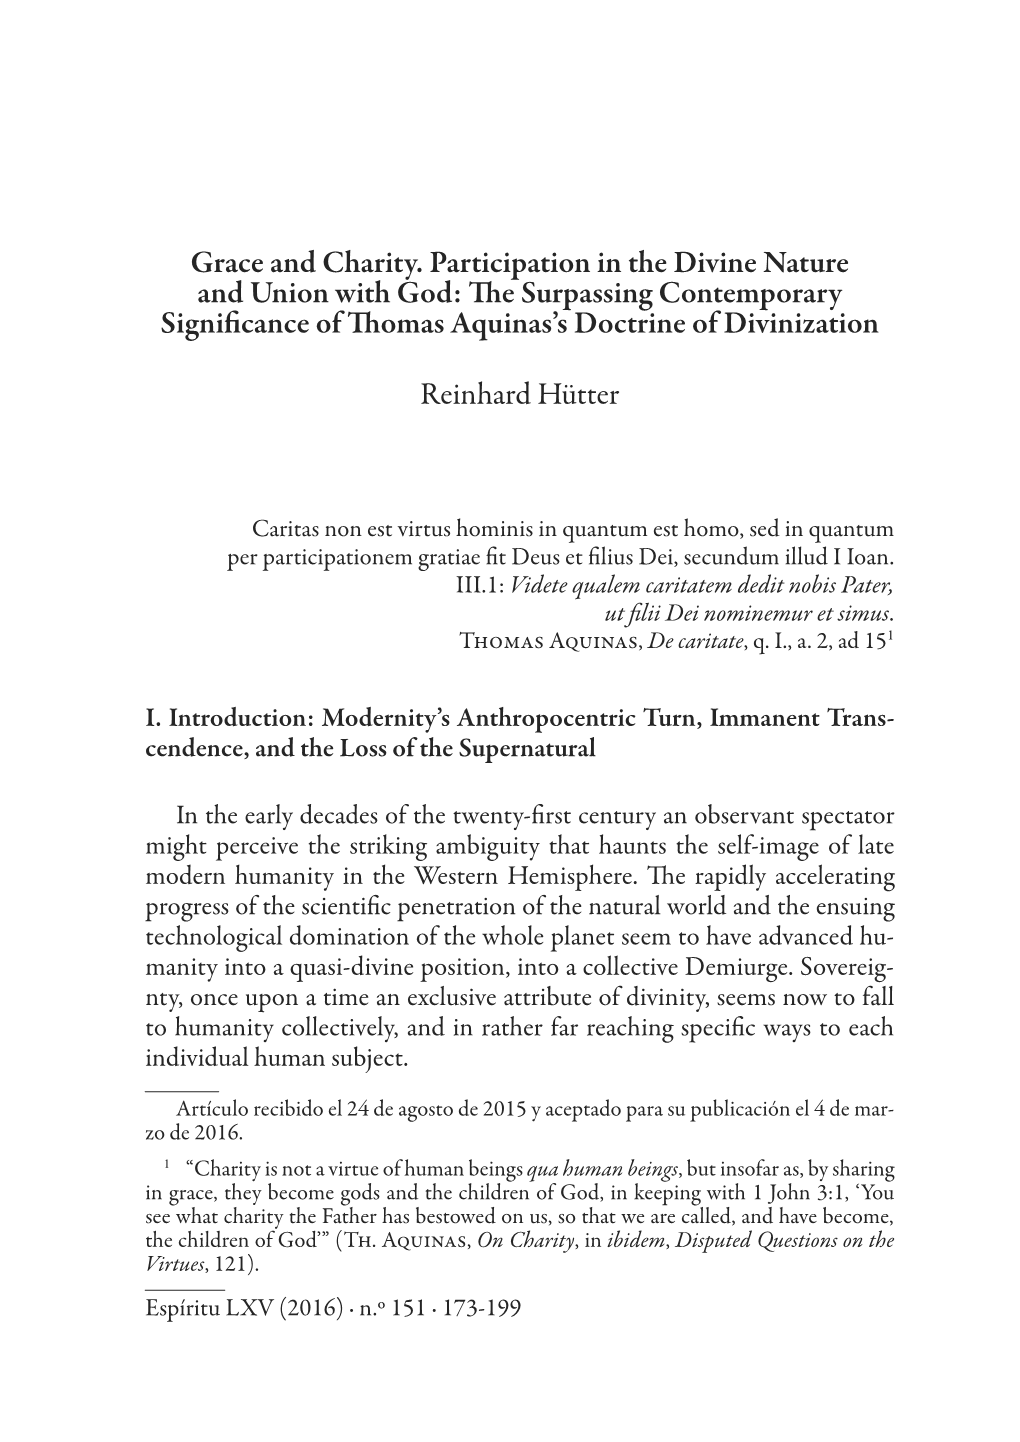 Grace and Charity. Participation in the Divine Nature and Union with God: the Surpassing Contemporary Significance of Thomas Aquinas’S Doctrine of Divinization